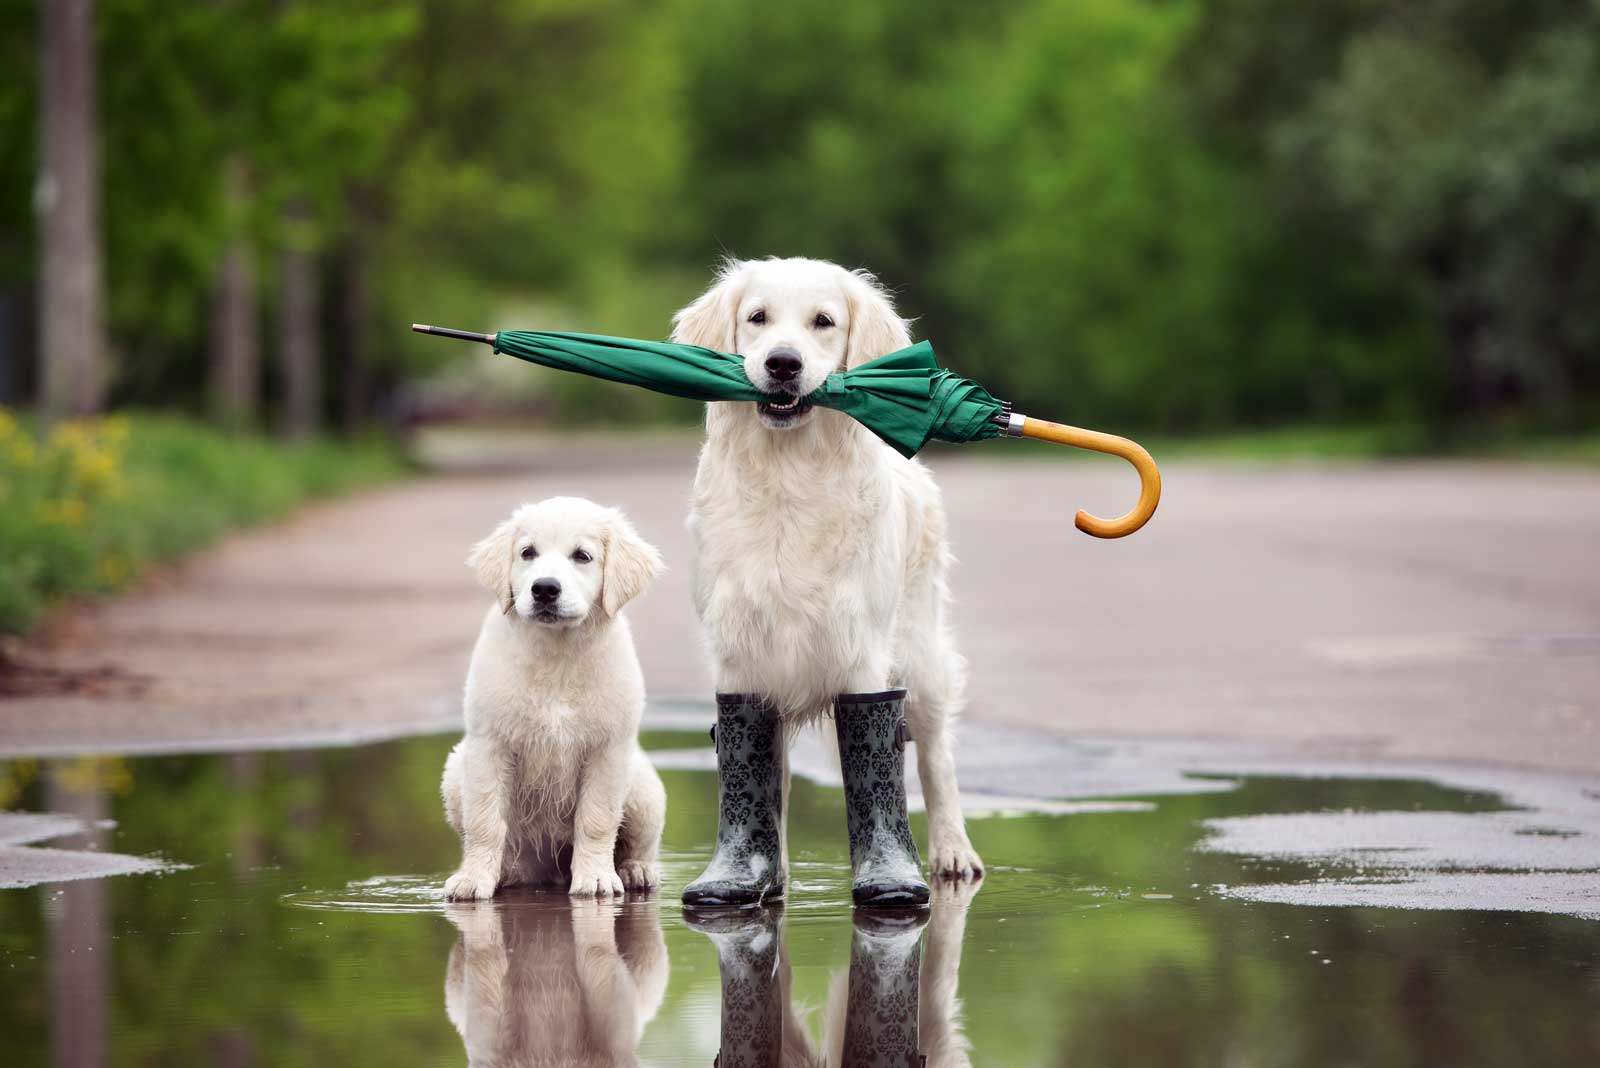 Dogs with Umbrella